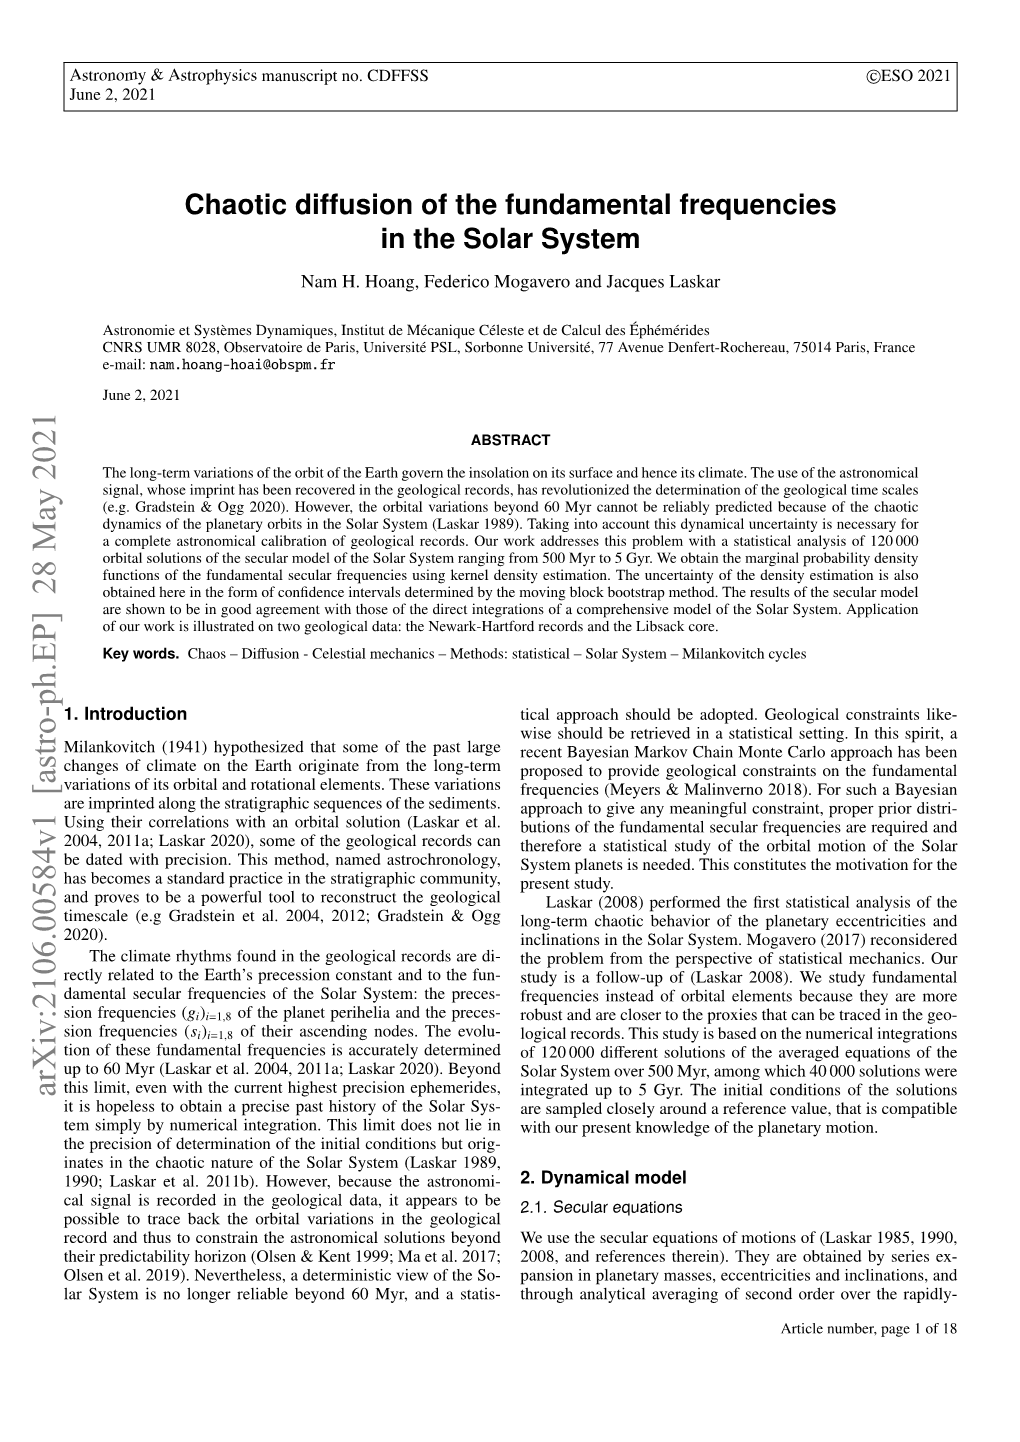 Chaotic Diffusion of the Fundamental Frequencies in the Solar System Nam H